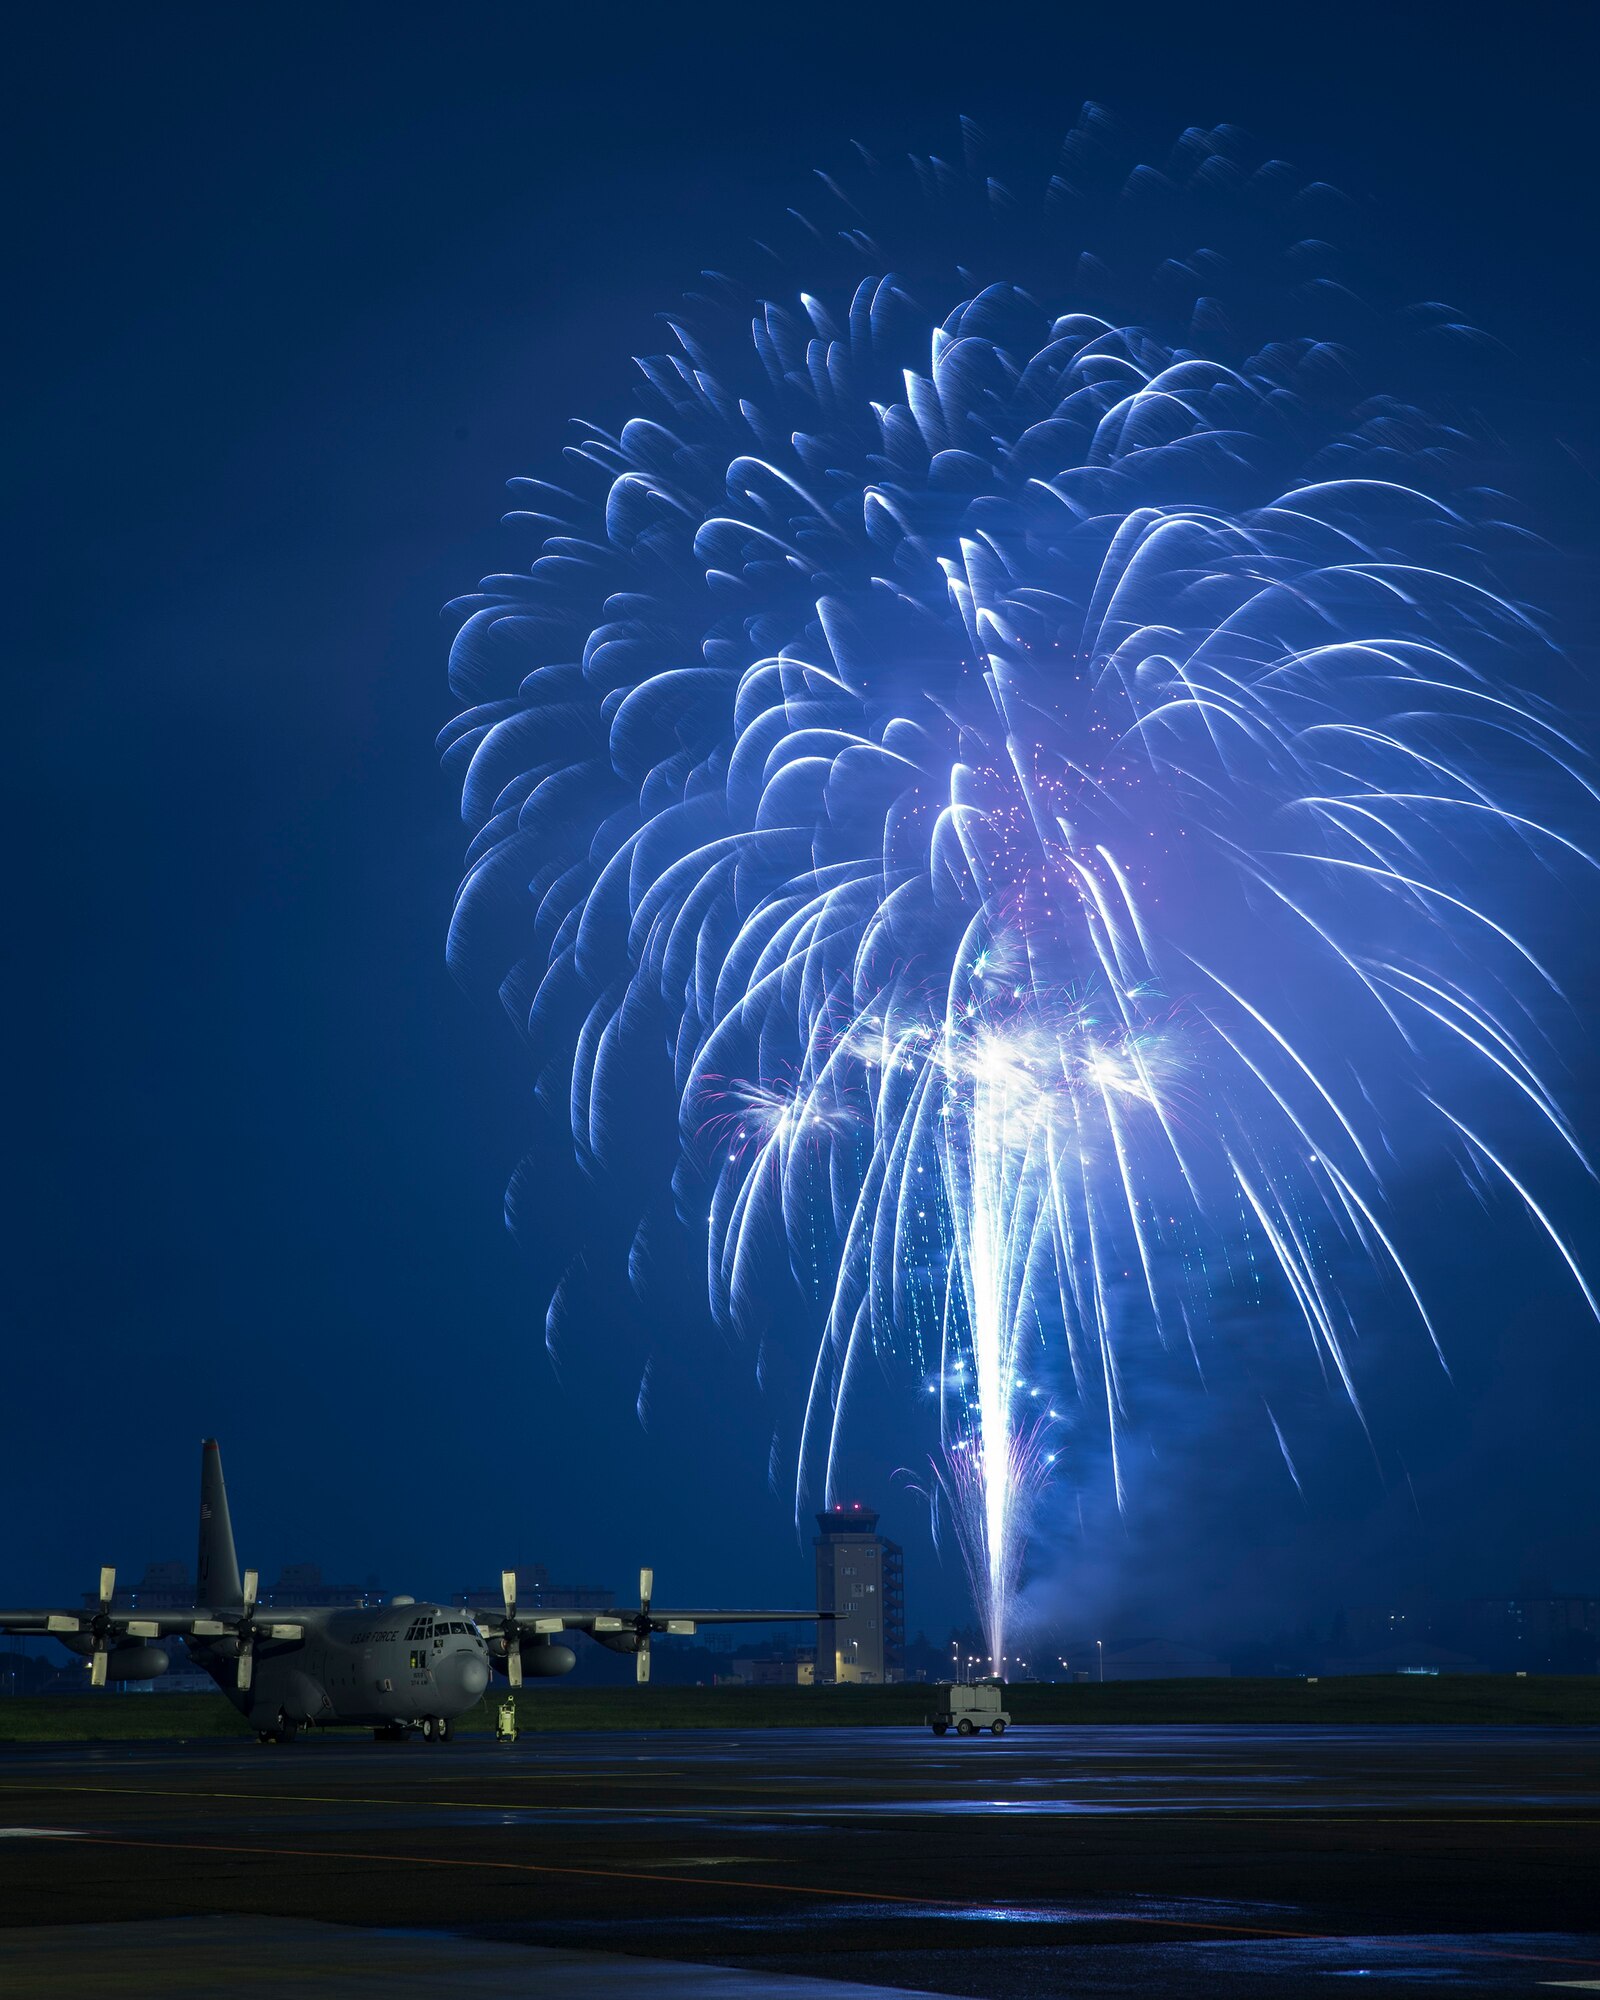 Fireworks explode behind a C-130 Hercules at the 2016 Friendship Festival at Yokota Air Base, Japan, Sept. 18, 2016. Tens of thousands of visitors attended the festival designed to bolster the bi-lateral relationship shared between the United States and Japan. In addition to static displays and live music, the festival offered a variety of American and Japanese food. (U.S. Air Force photo by Yasuo Osakabe/Released)